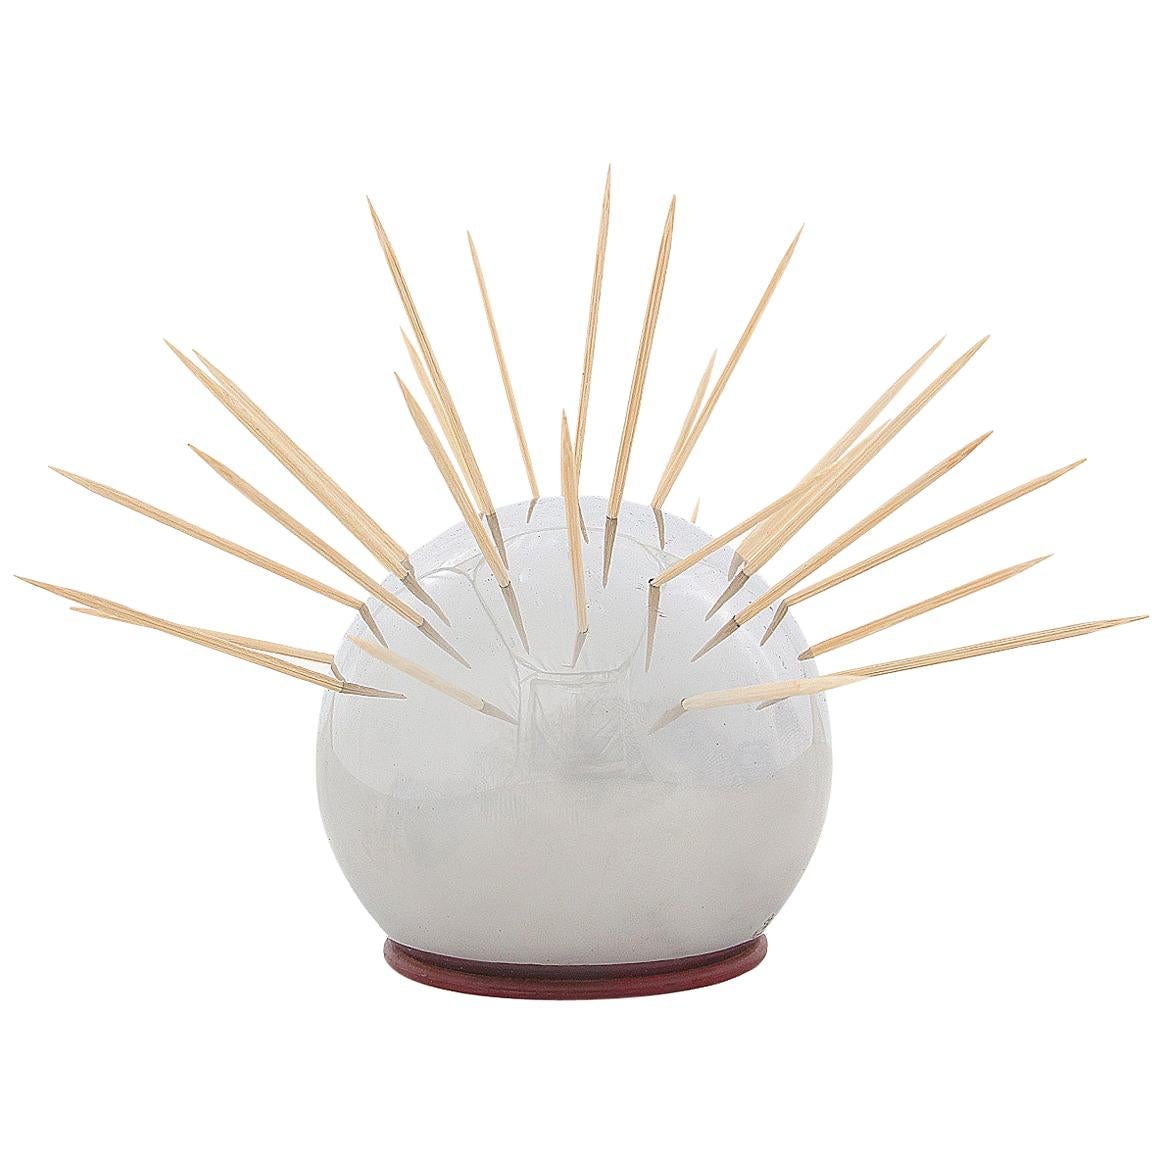 Toothpick Server For Sale